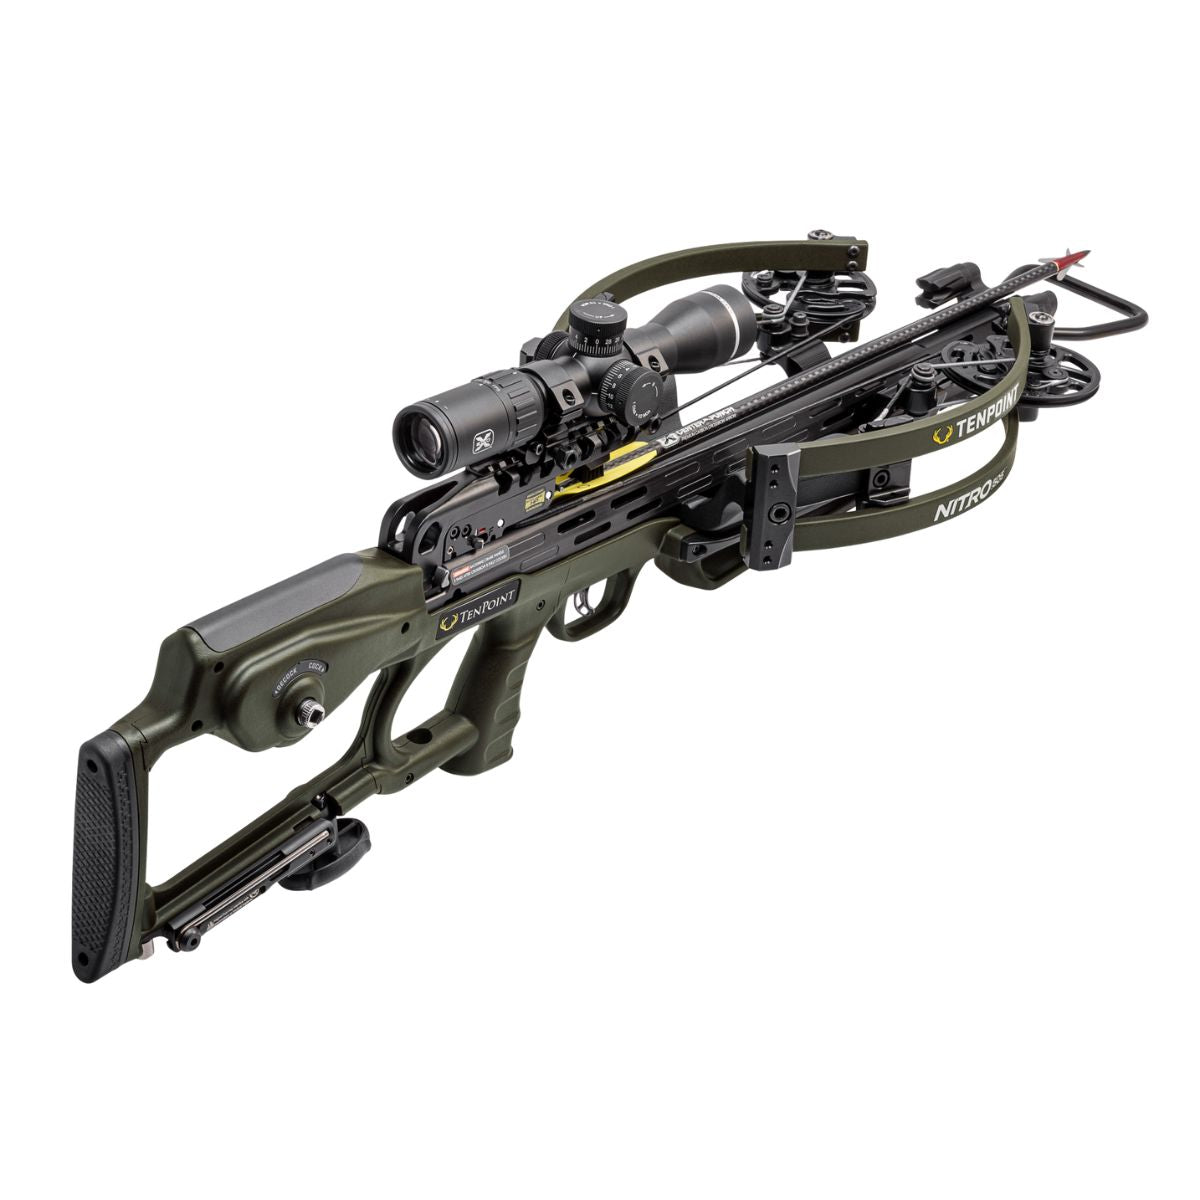 TenPoint Nitro 505 Compound Crossbow Package